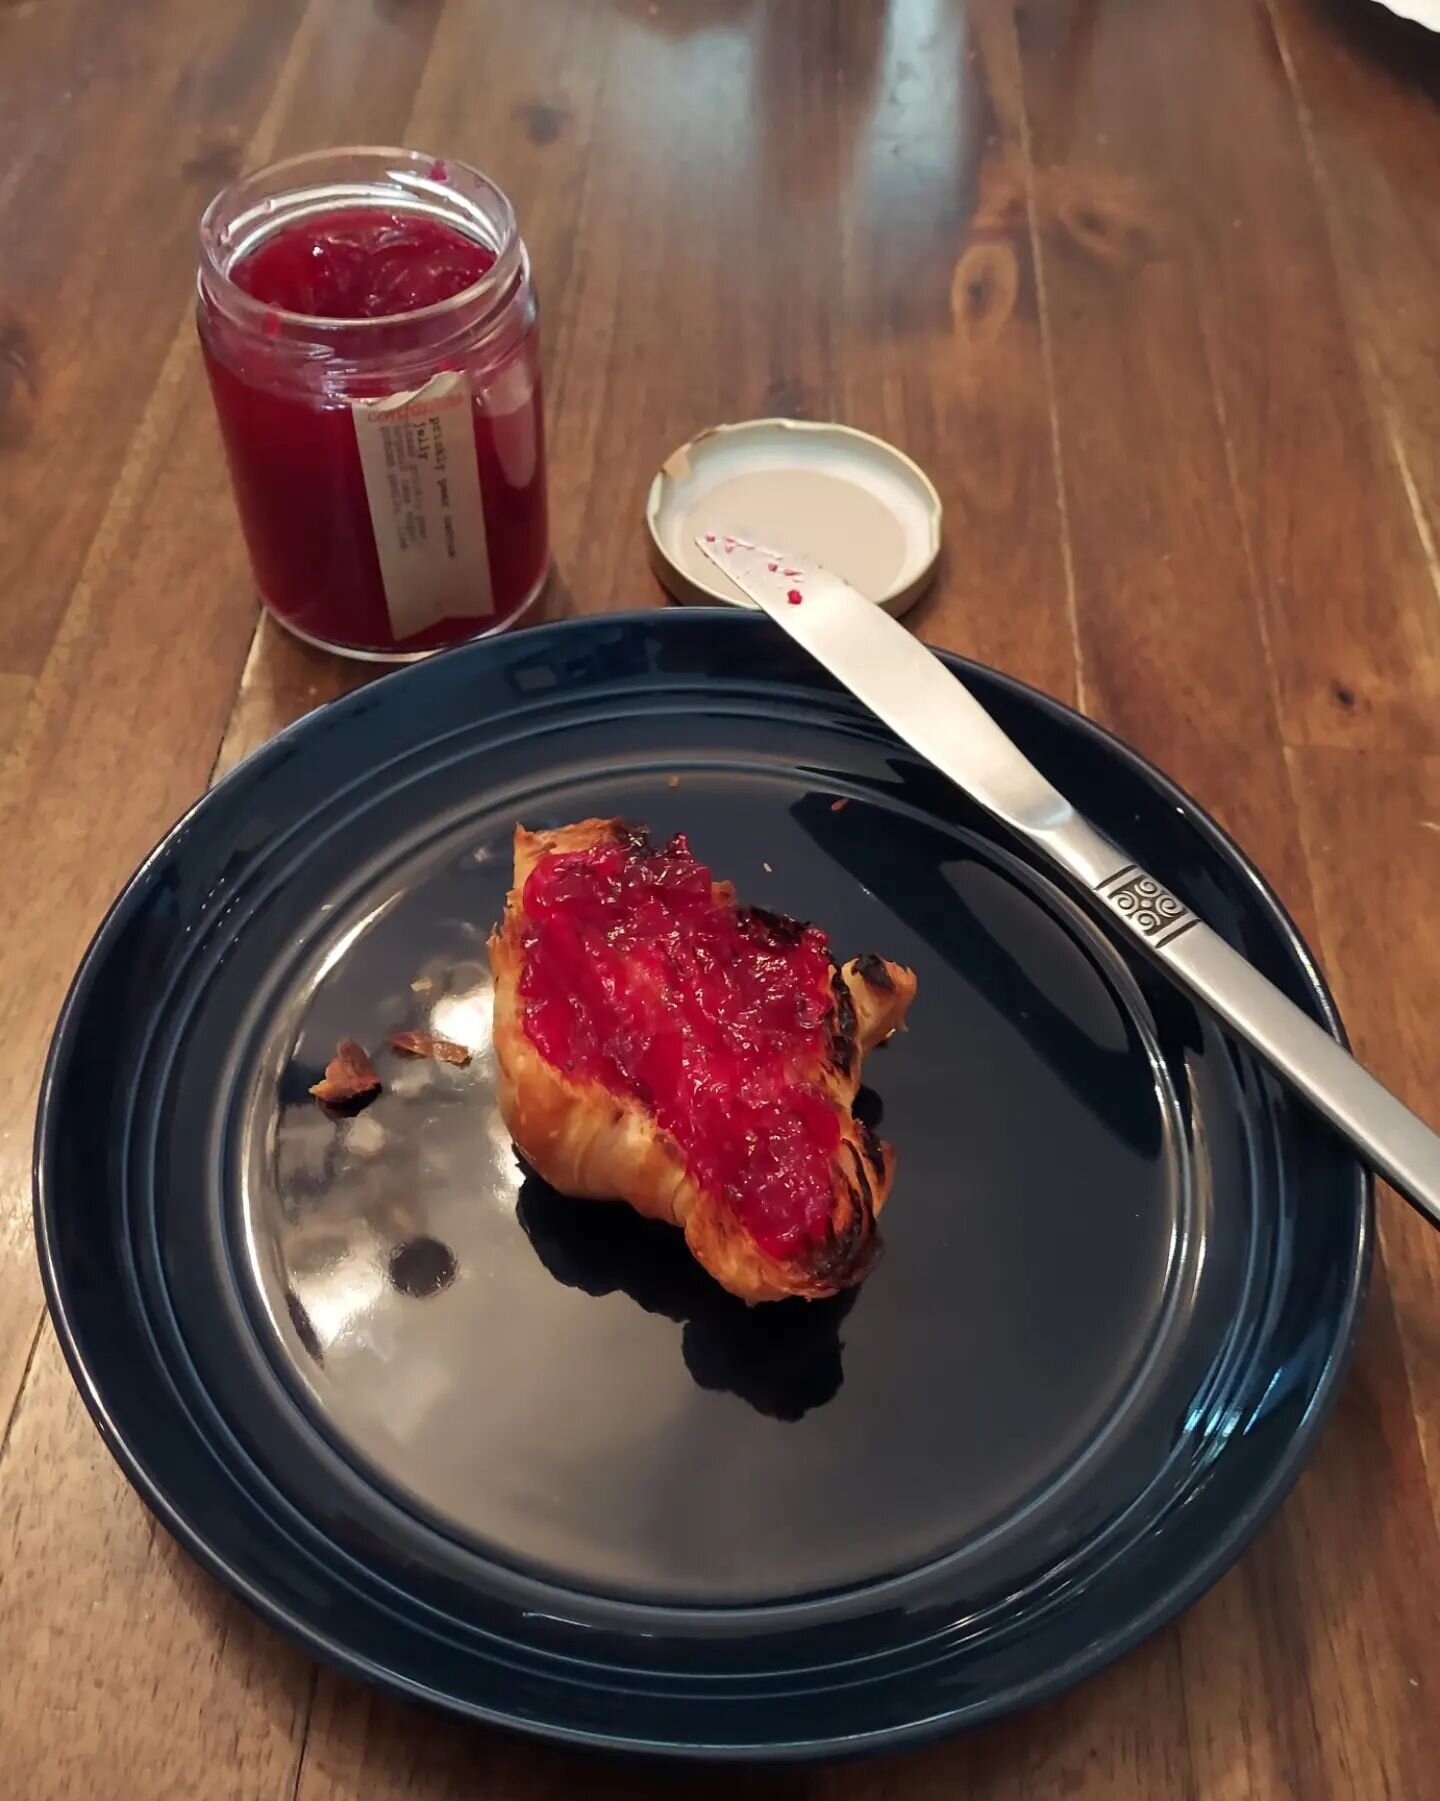 If you're needing a Prickly Pear fix, head on over to @confituras for some Prickly Pear jelly and lime pound cake with Prickly Pear glaze during their Wild Week!  Order online and pick up this weekend.